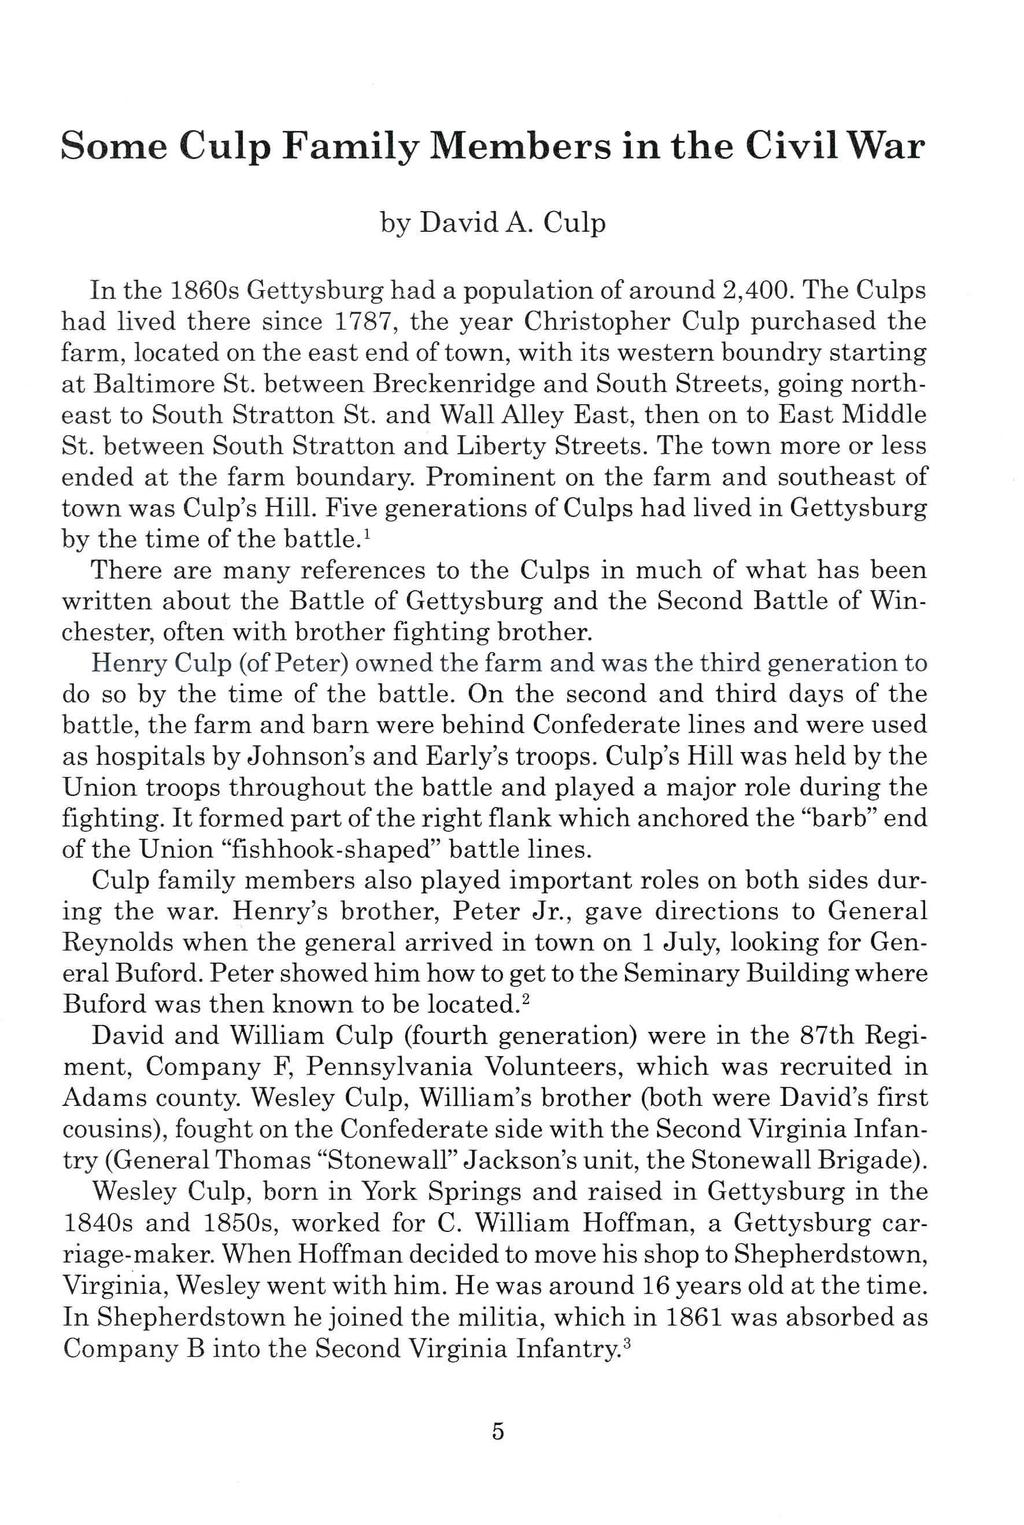 Culp: Some Culp Family Members in the Civil War Some Culp Family Members in the Civil War by David A. Culp In the 1860s Gettysburg had a population of around 2,400.